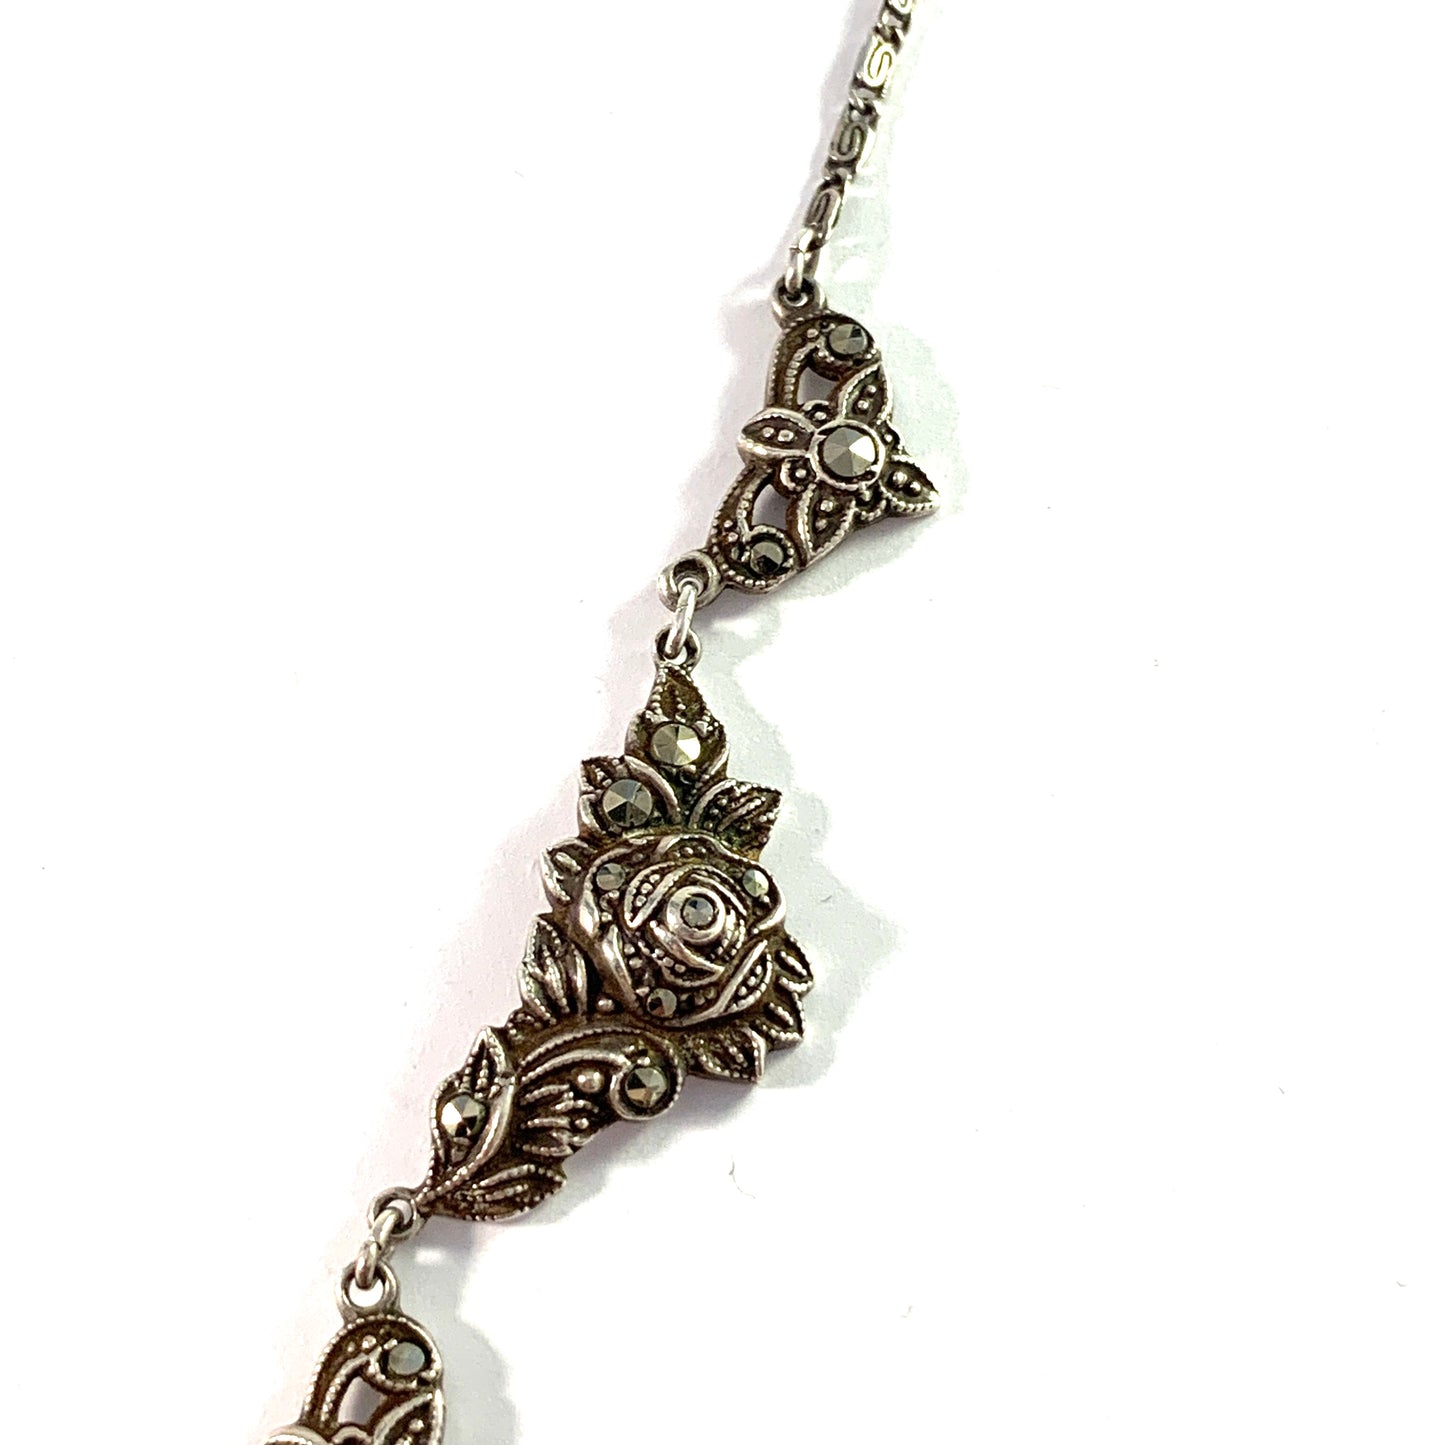 Vintage Mid Century Sterling Silver Marcasite Floral Necklace.